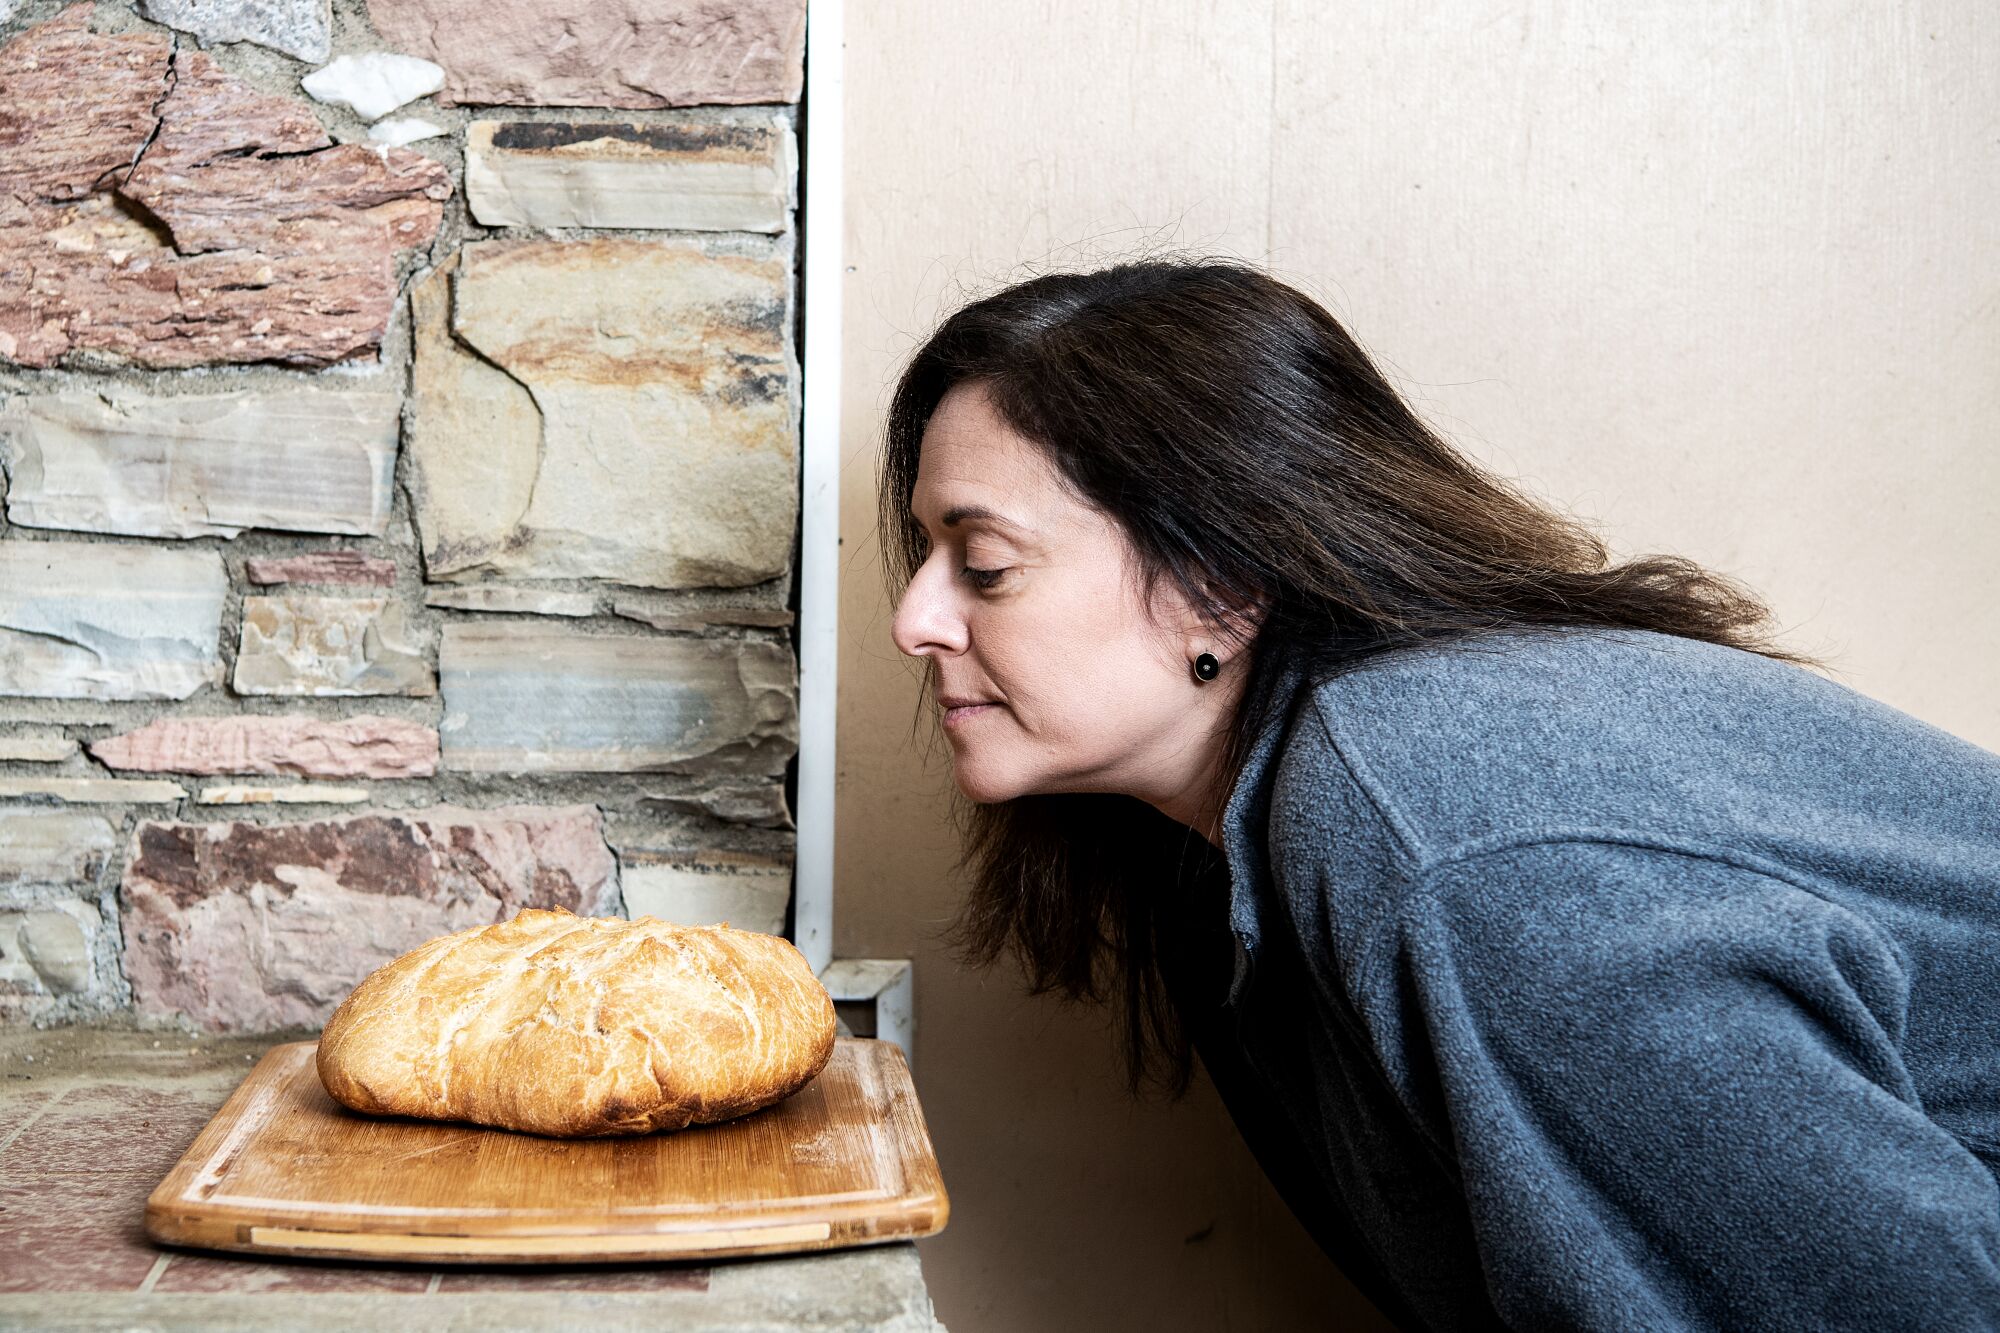 Sharon Lieblein admires her baked bread at her home on April 9.